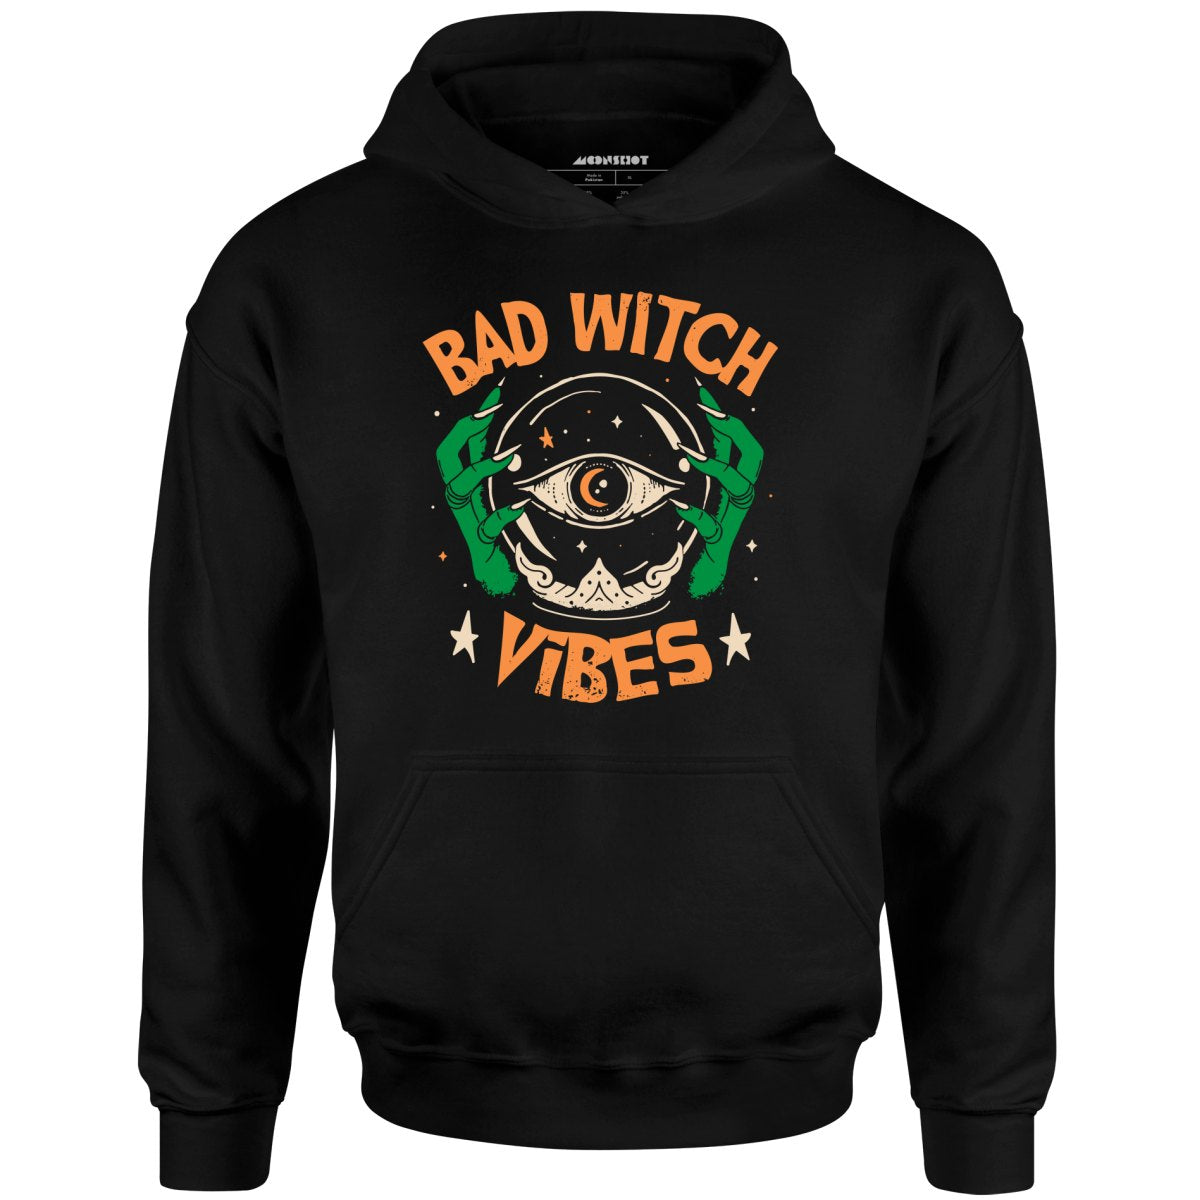 Bad Witch Vibes - Unisex Hoodie